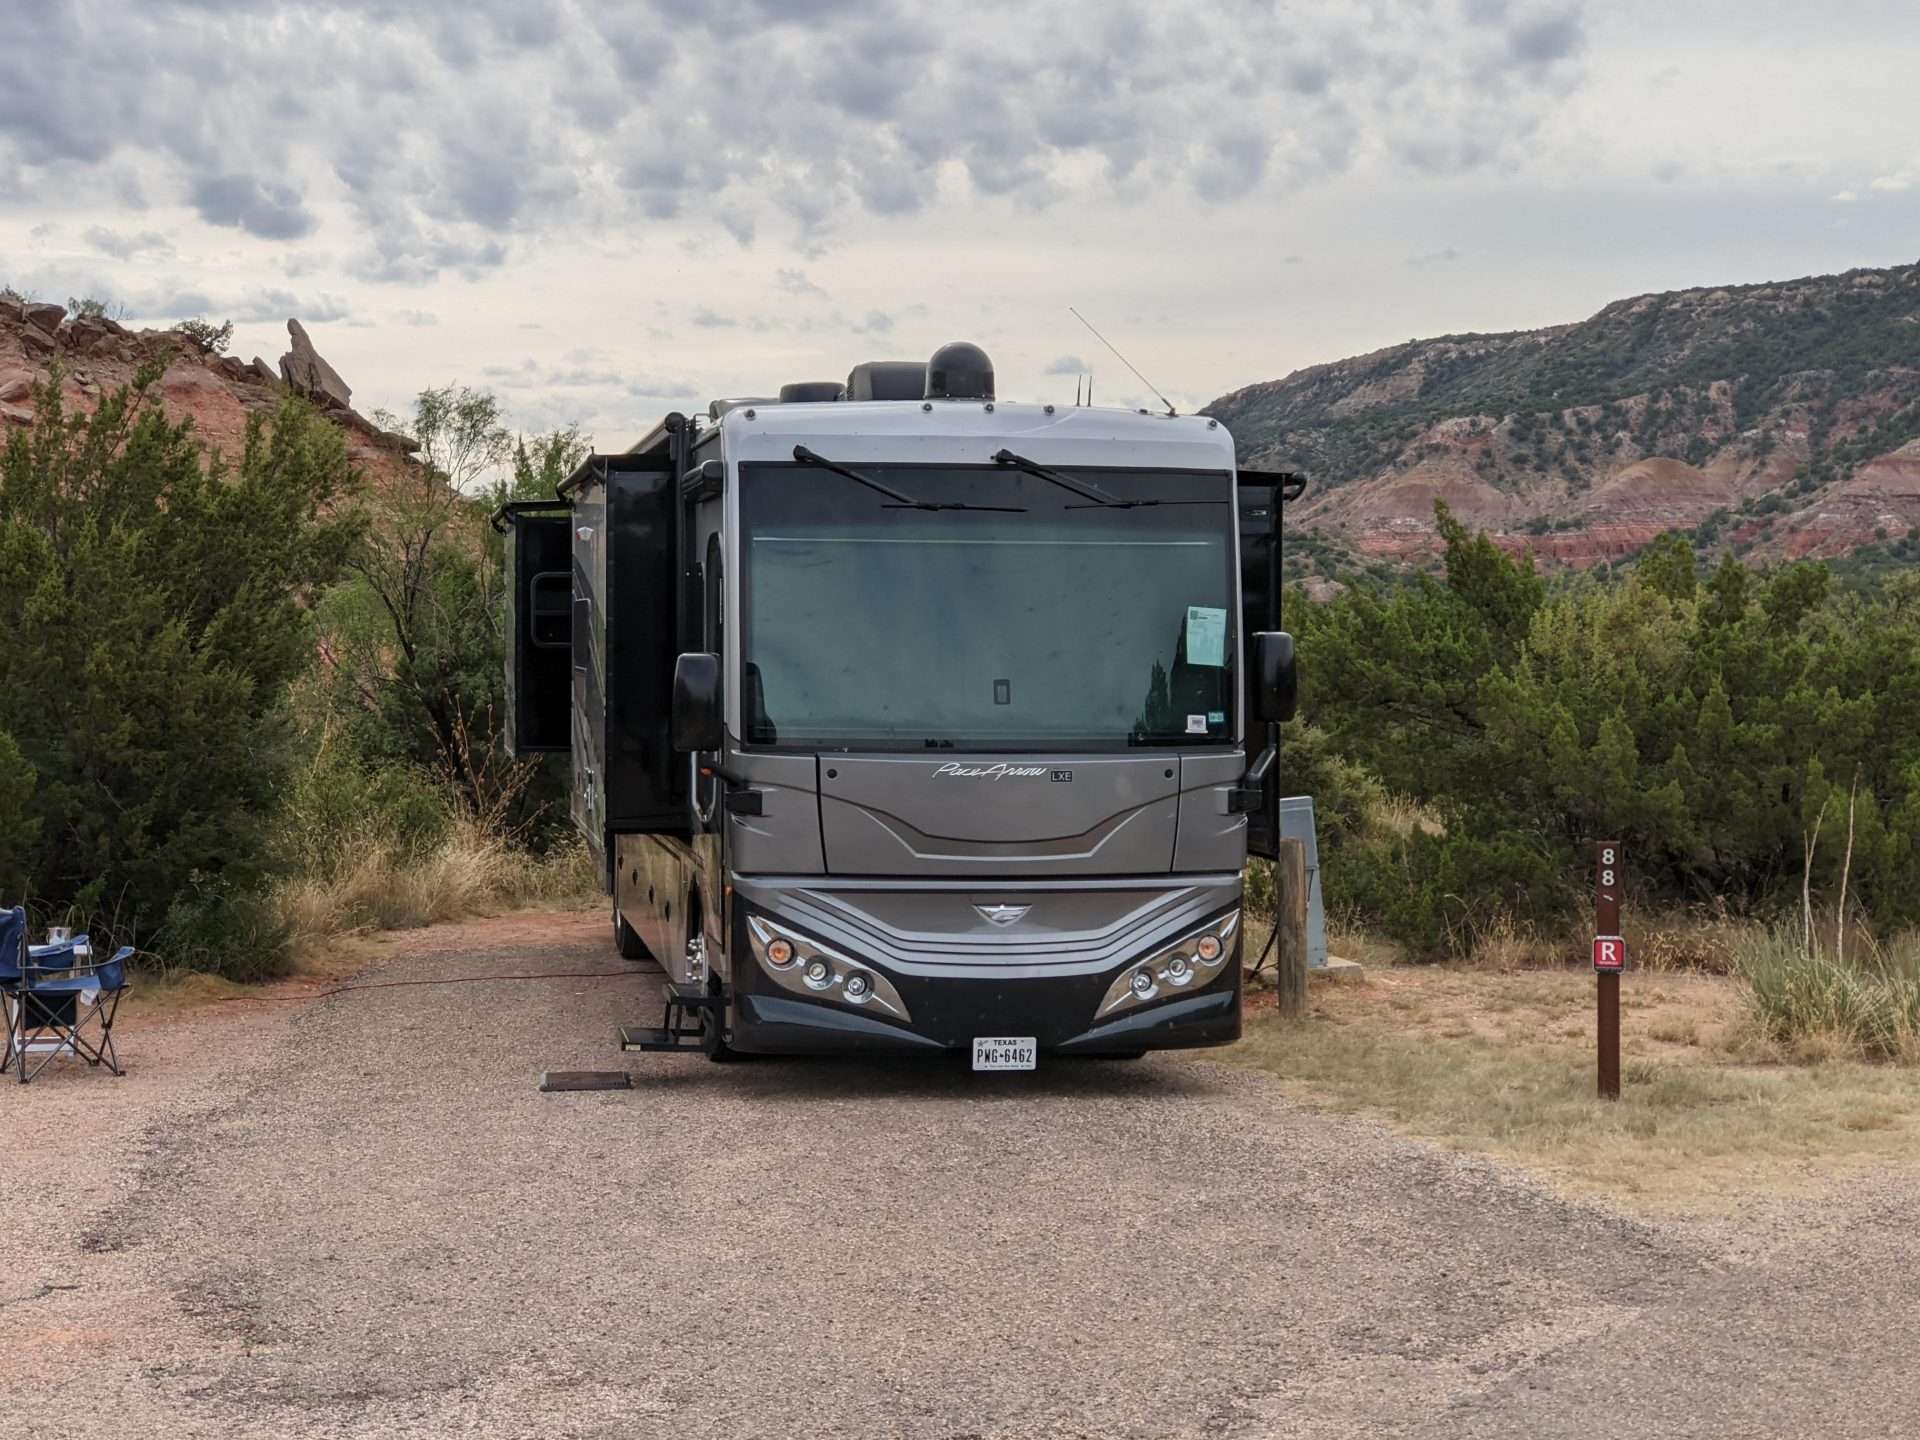 Class C RV parked in campsite